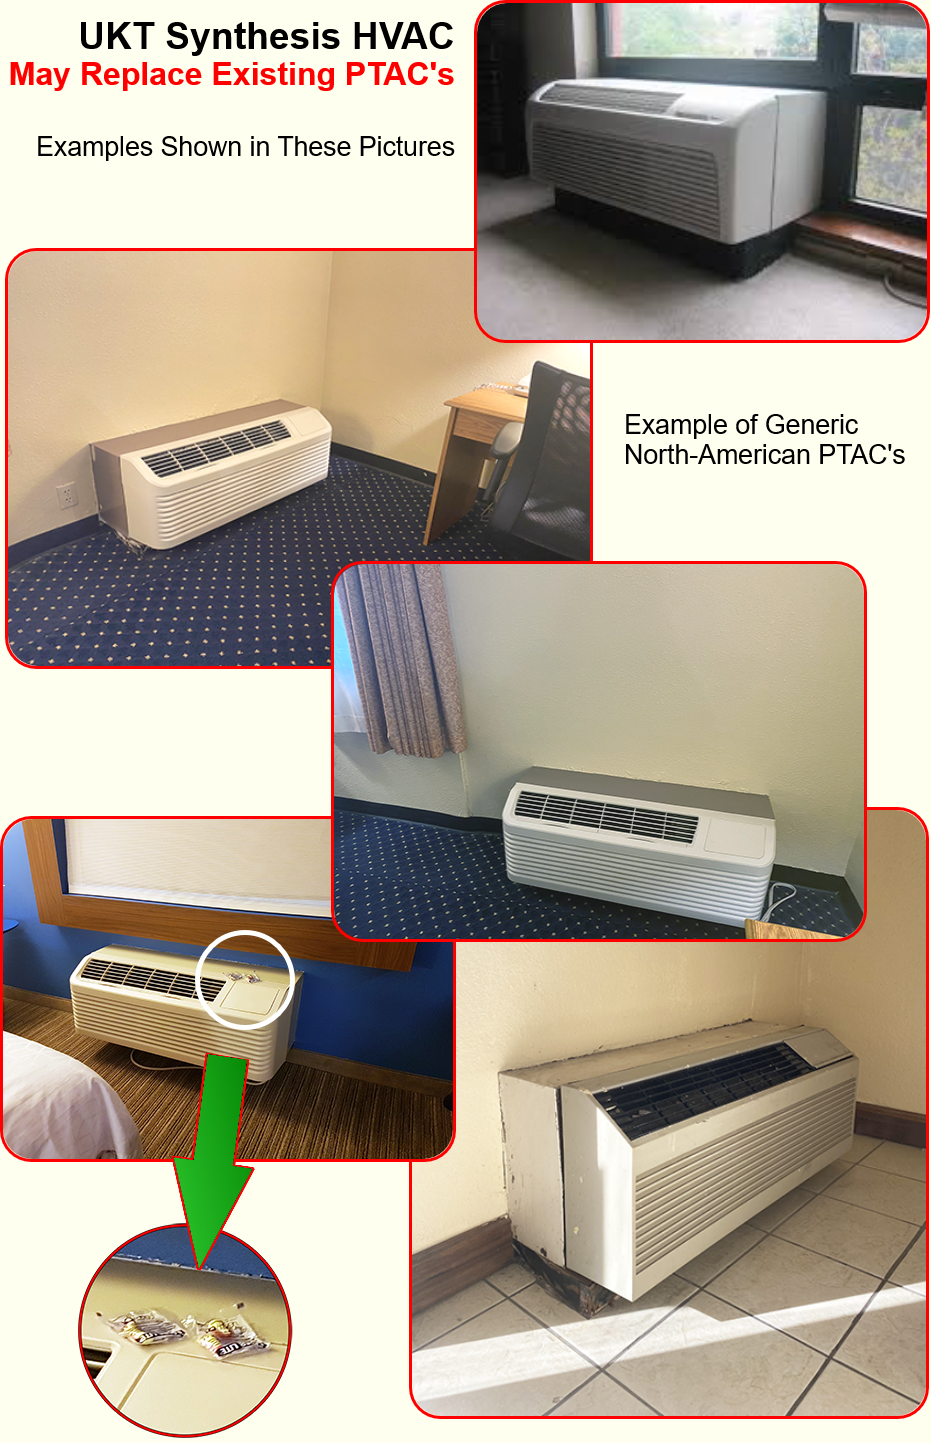 PTAC Examples Which Can Be Replaced With UKT Synthesis Air Conditioner